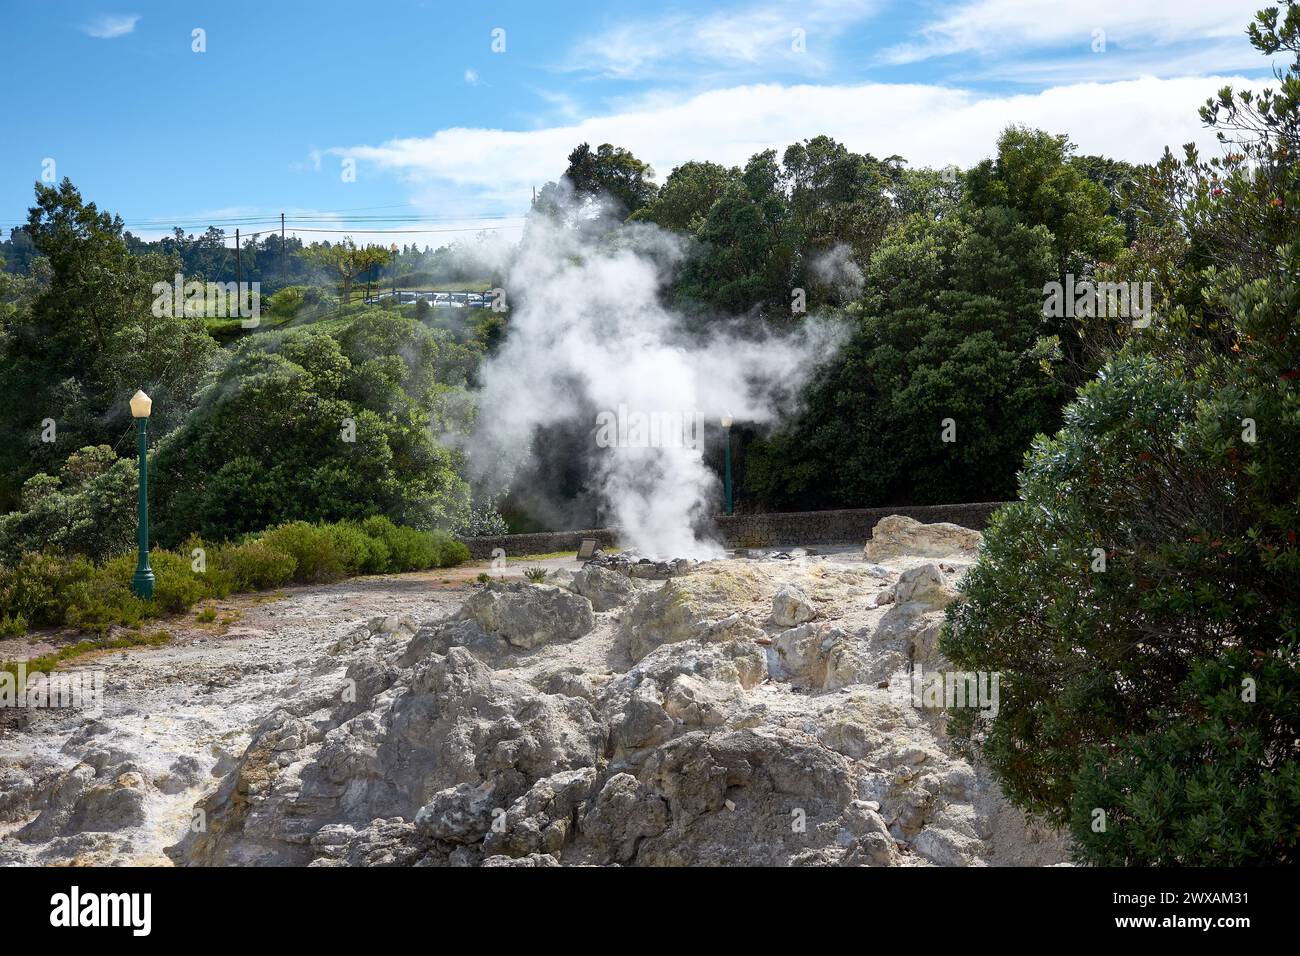 The Caldeiras do Vulcão das Furnas are in different states of activity, some dry and others with a large flow of hot water. Fumaroles, boiling mud and Stock Photo